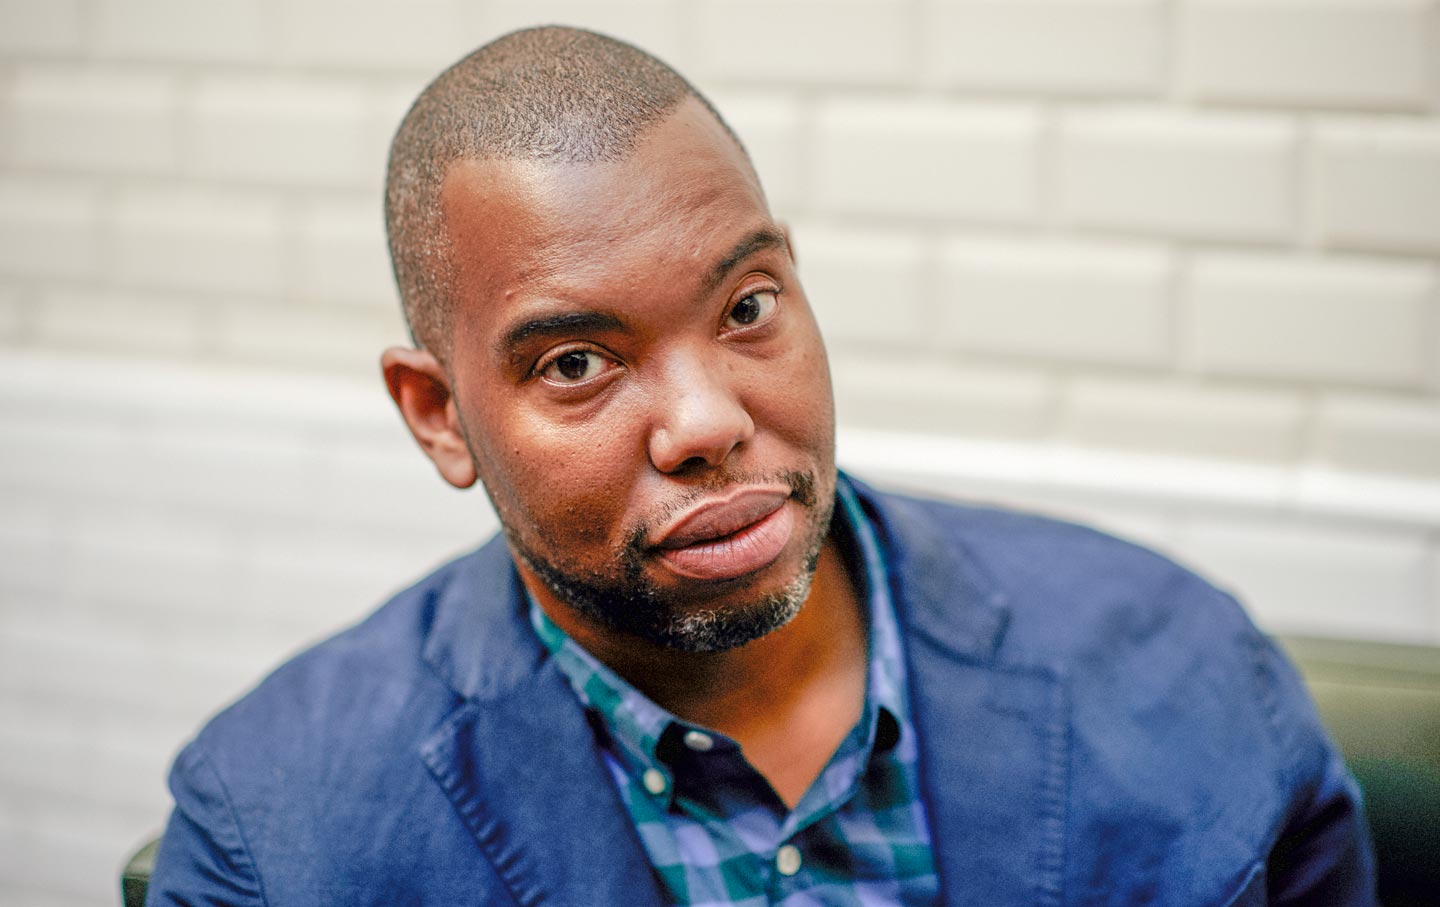 LIVE: Between the Lines With Ta-Nehisi Coates